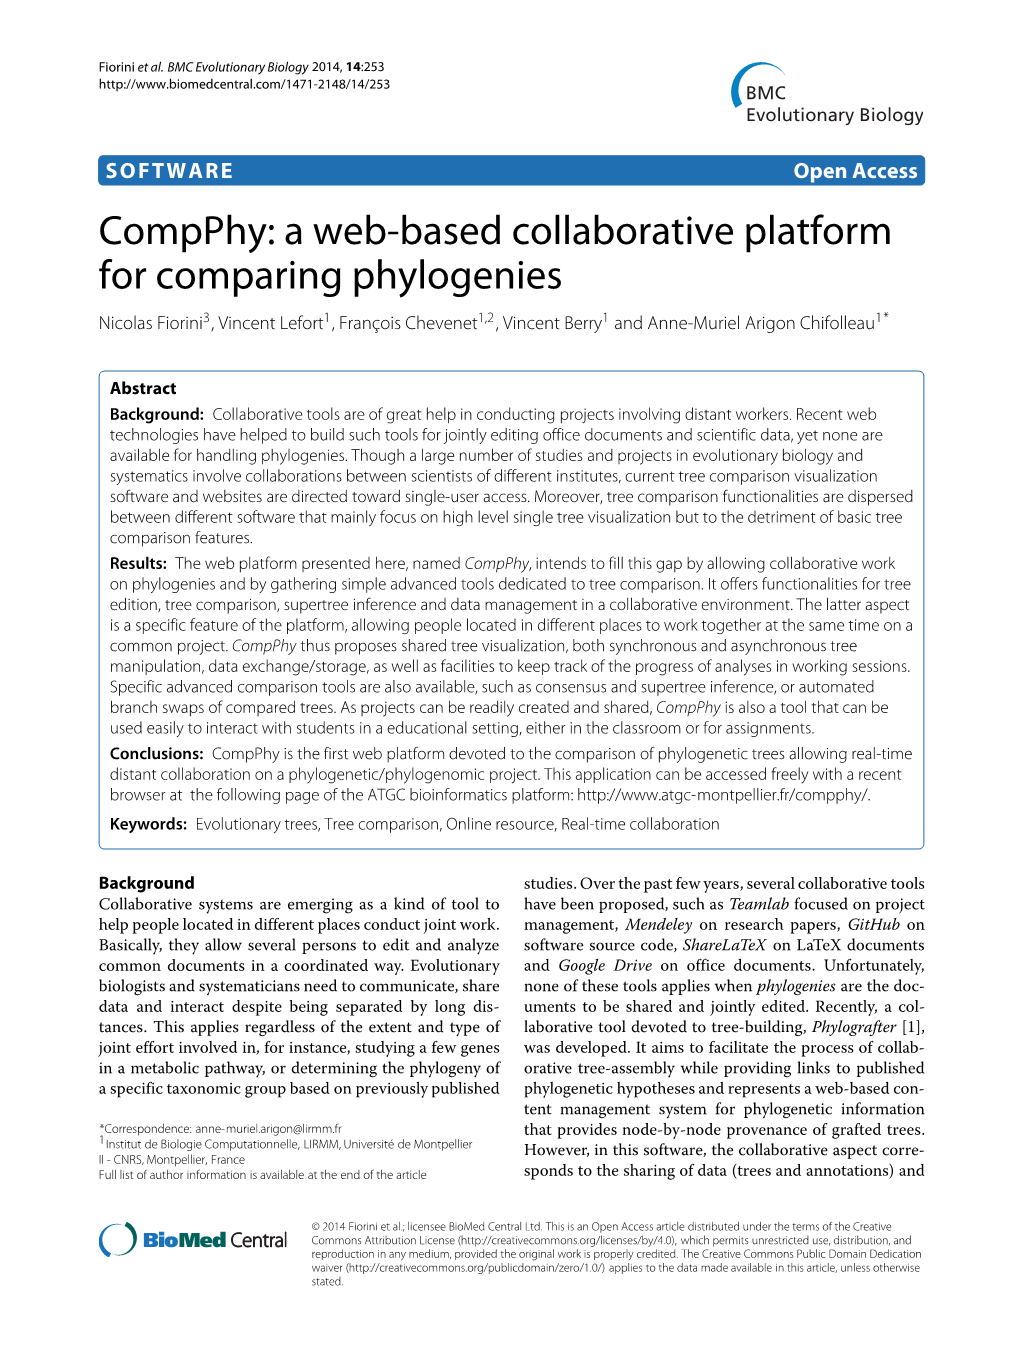 Compphy: a Web-Based Collaborative Platform for Comparing Phylogenies